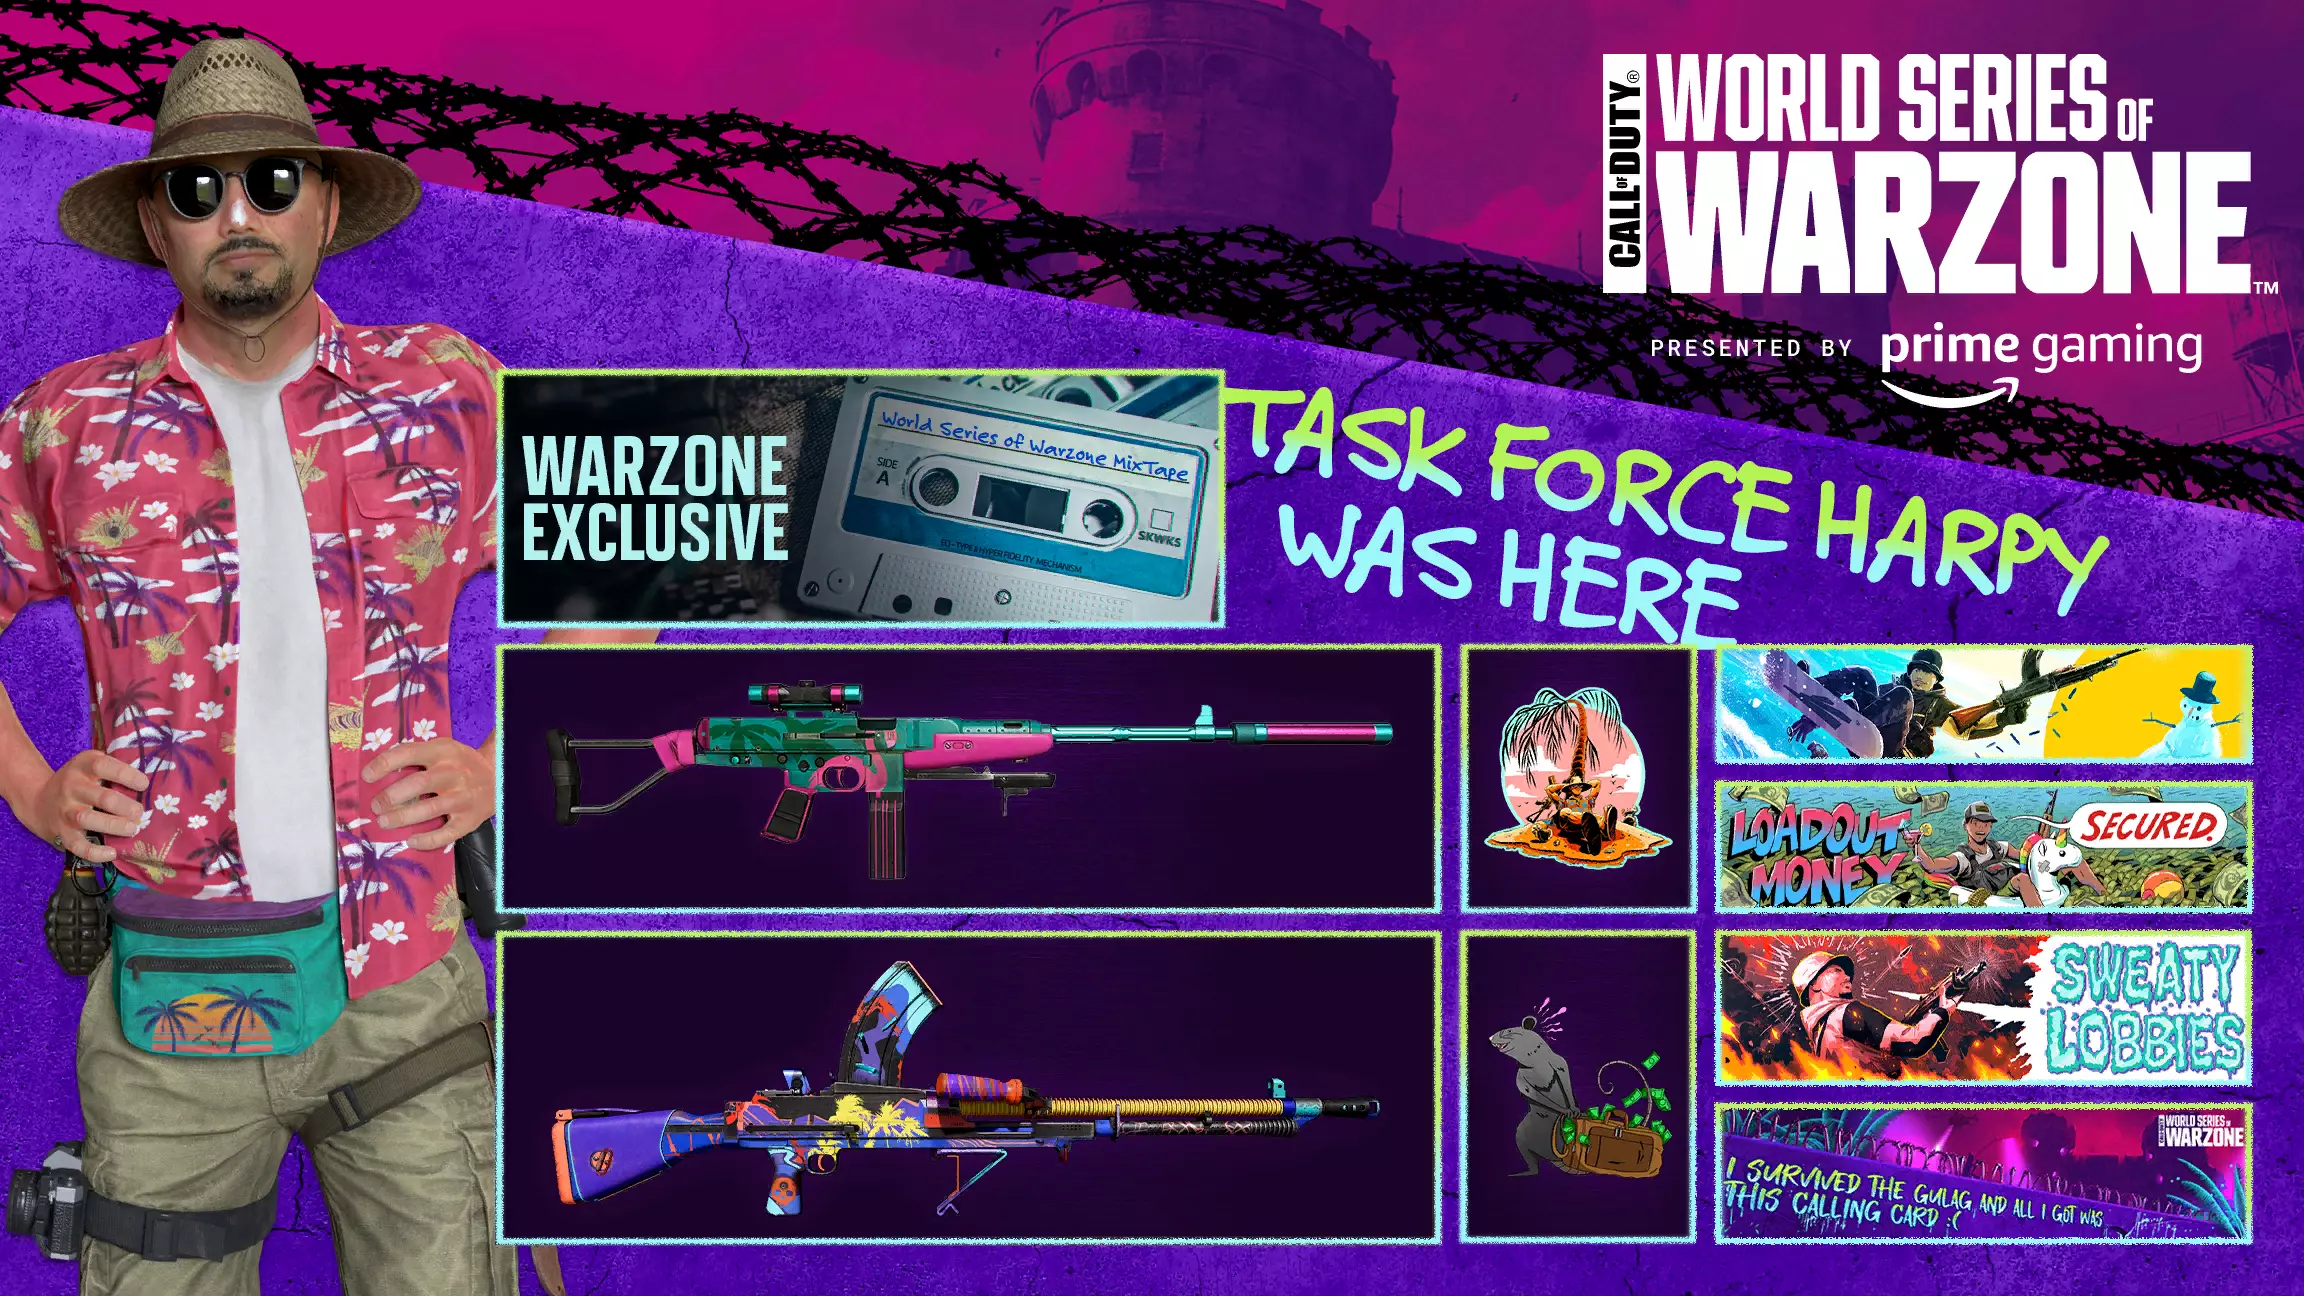 How To Get Free World Series Of Warzone Rat Pack Bundle From